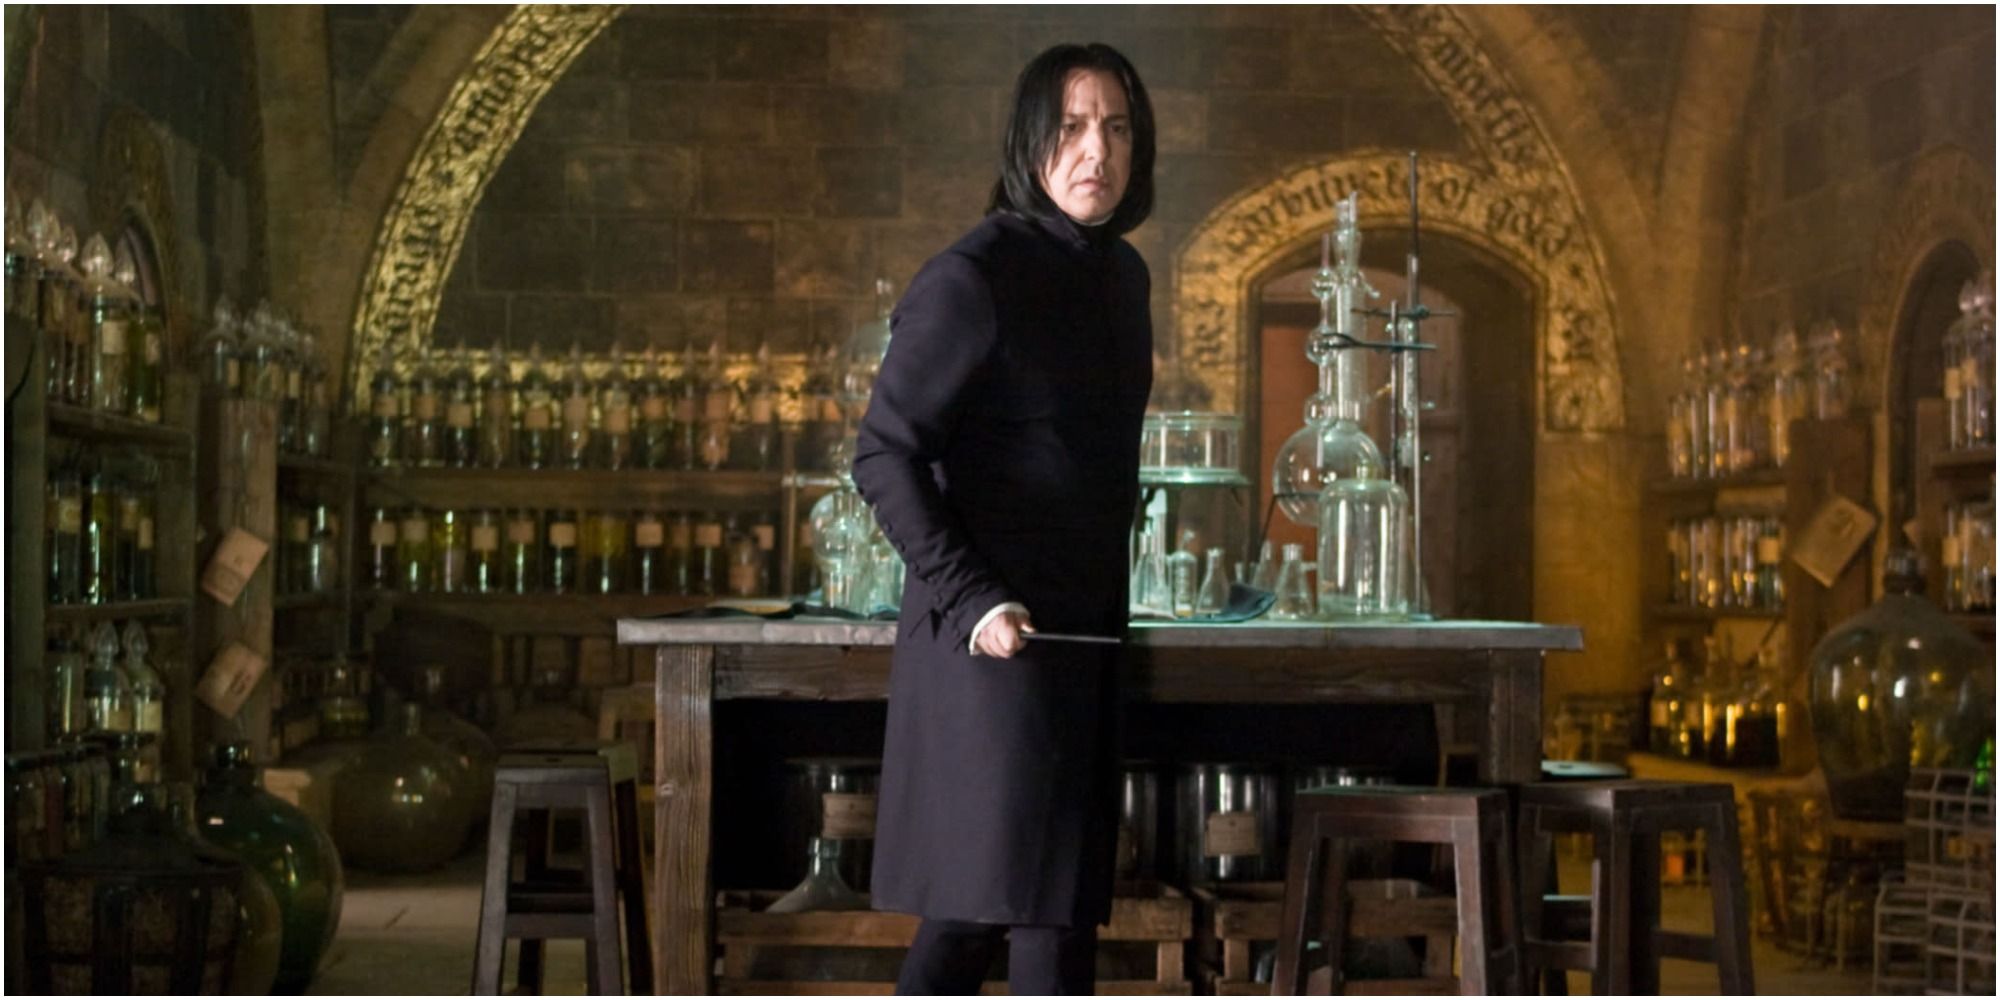 A screenshot of Professor Severus Snap in the Potions Room from Harry Potter and the Philosopher's Stone